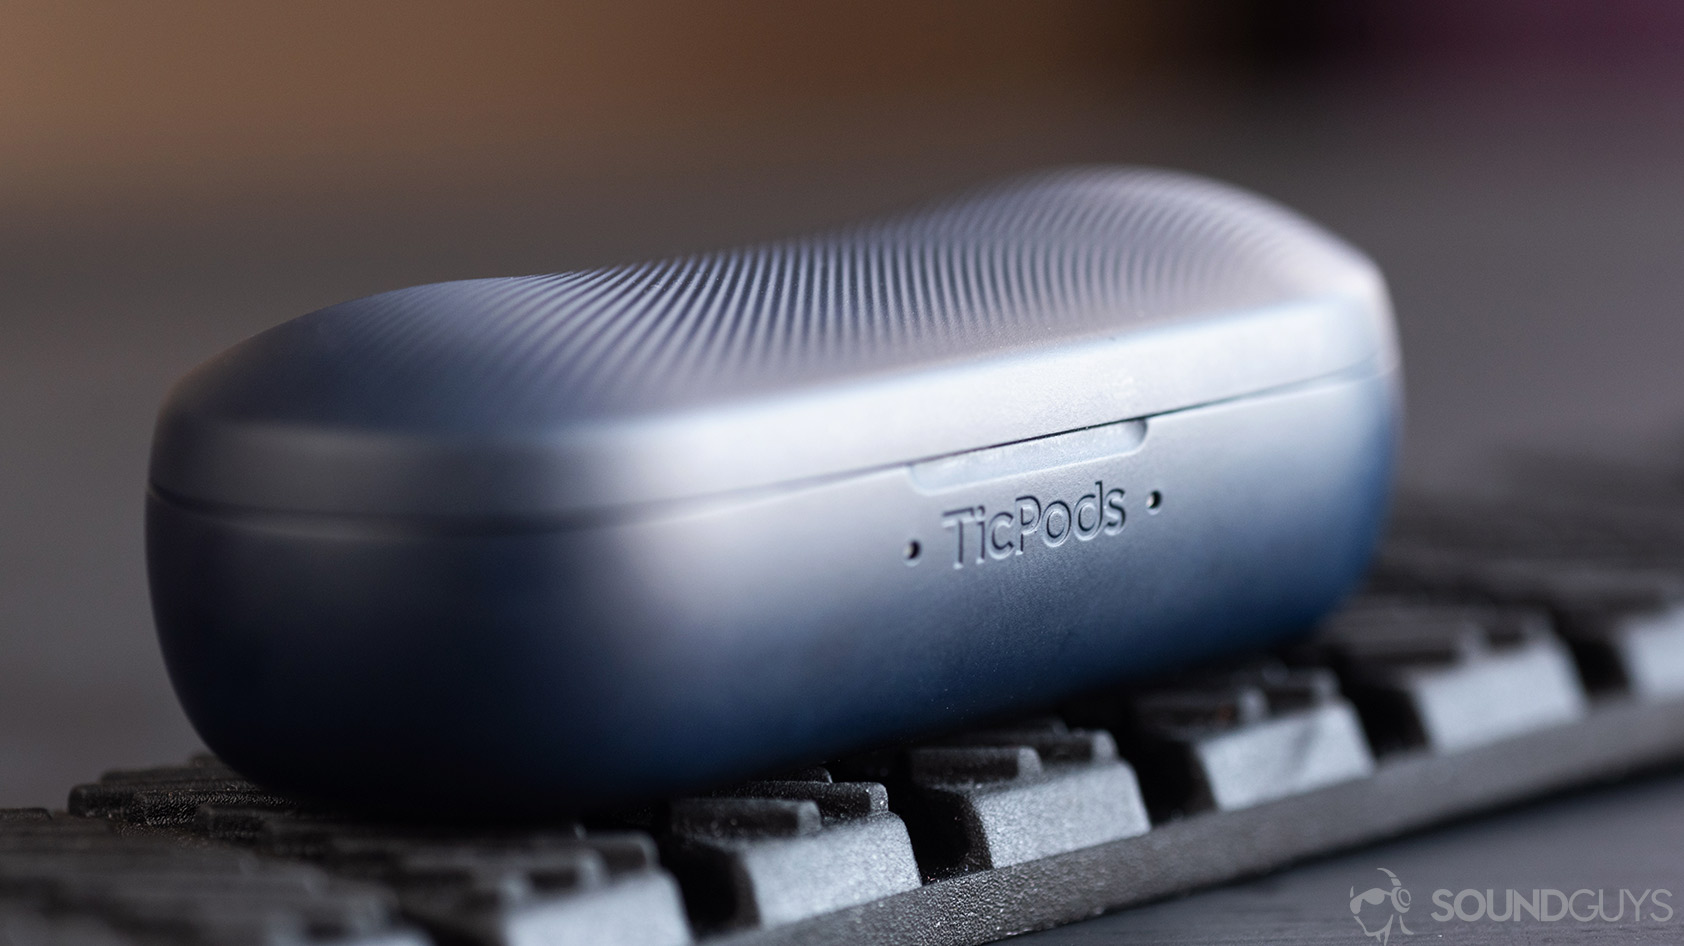 The Mobvoi TicPods 2 Pro true wireless earbuds charging case with the TicPods name in focus.